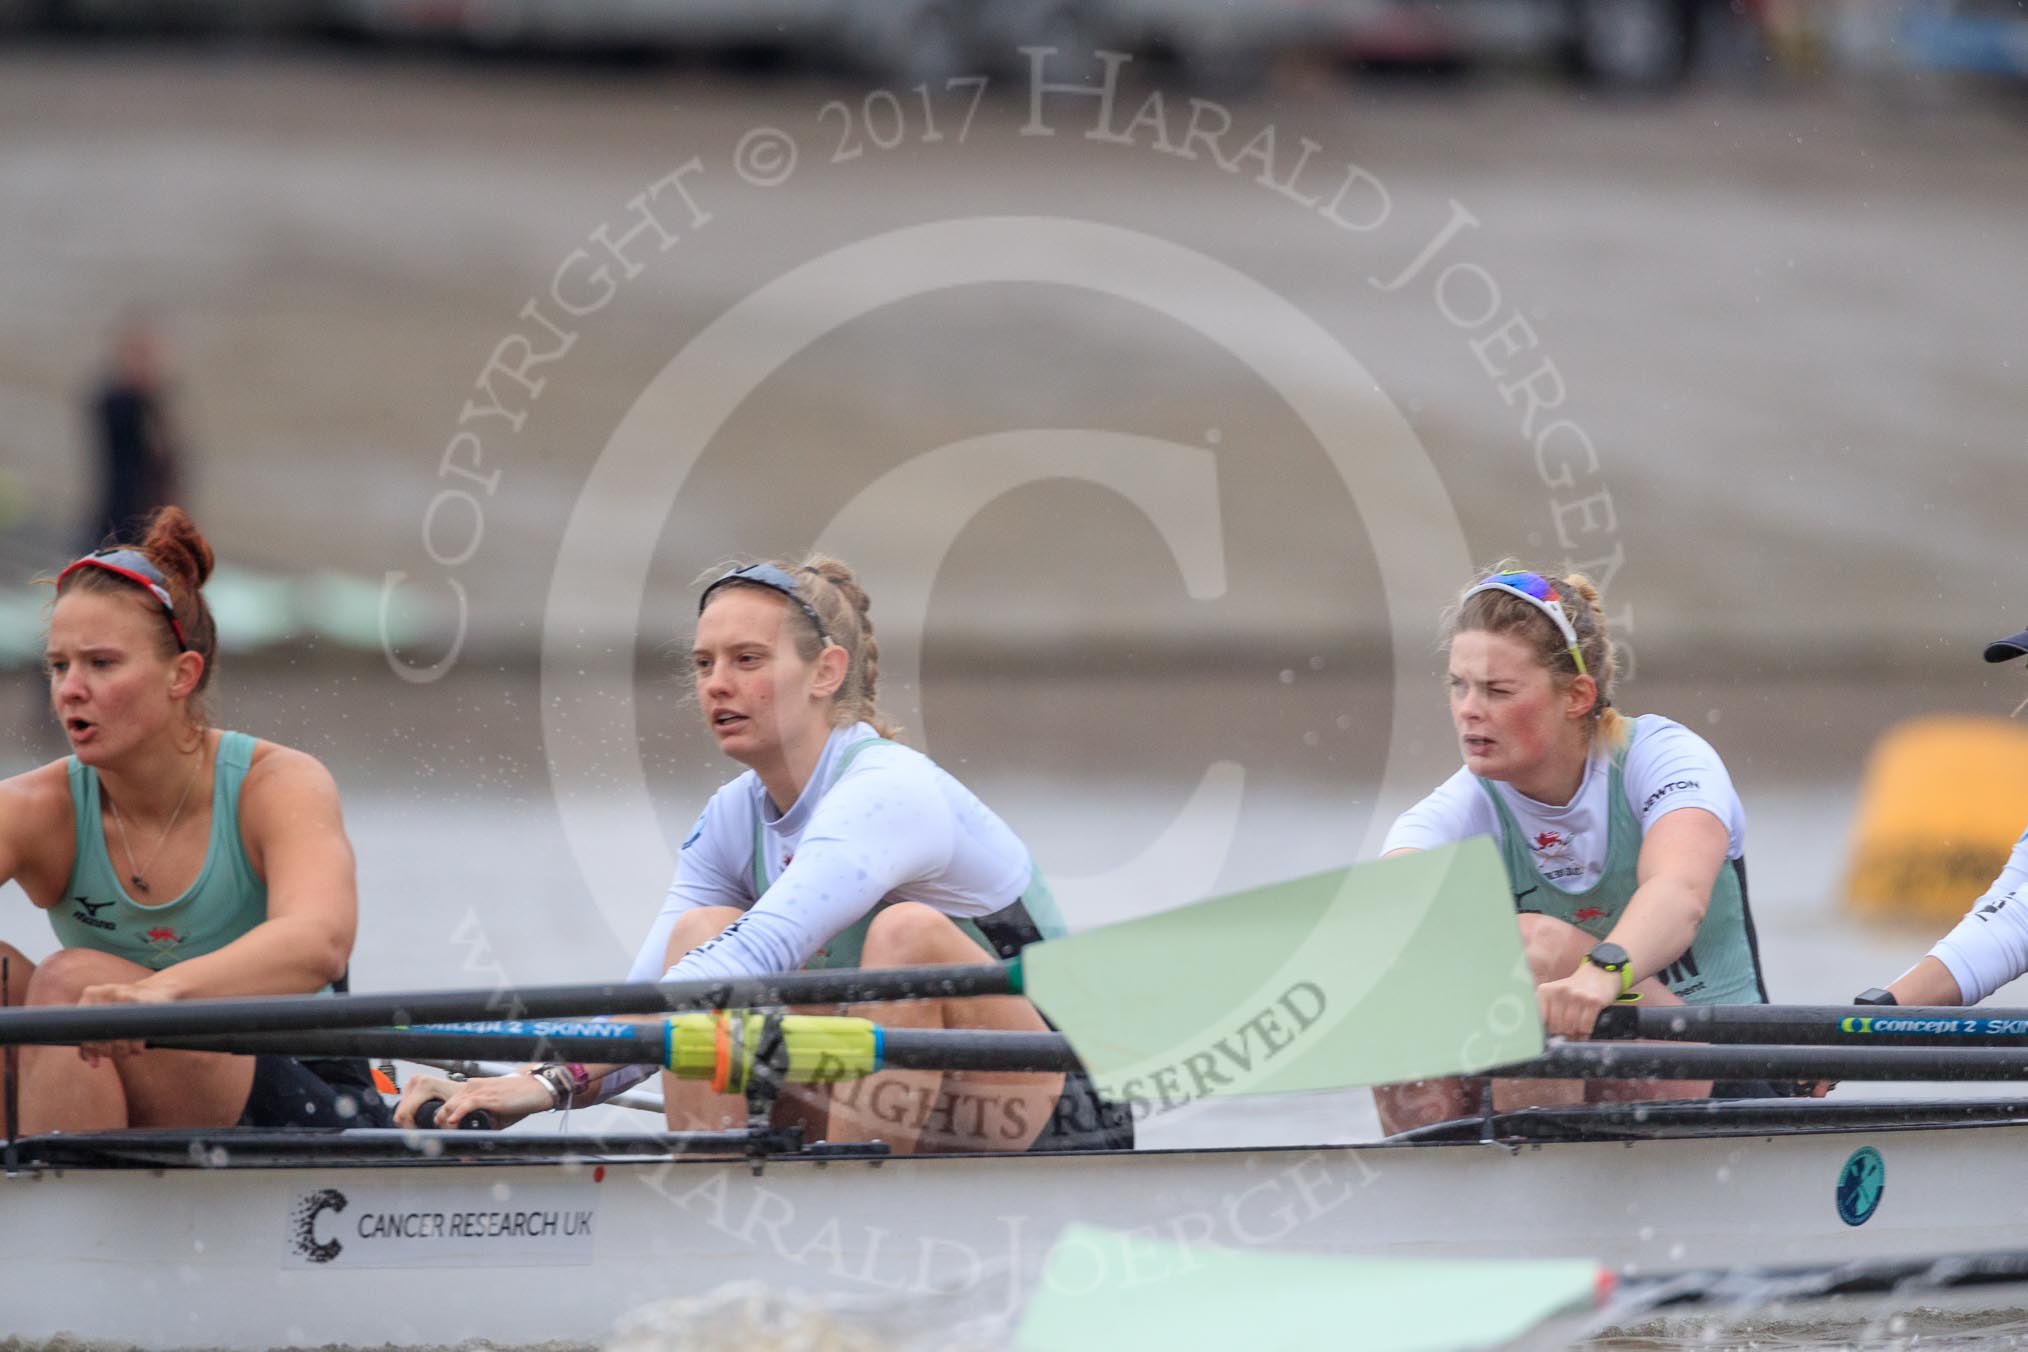 The Boat Race season 2018 - Women's Boat Race Trial Eights (CUWBC, Cambridge): Expecto Patronum . here 5 Kelsey Barolak, 4 Laura Foster, 3 Sally O Brien.
River Thames between Putney Bridge and Mortlake,
London SW15,

United Kingdom,
on 05 December 2017 at 12:44, image #62